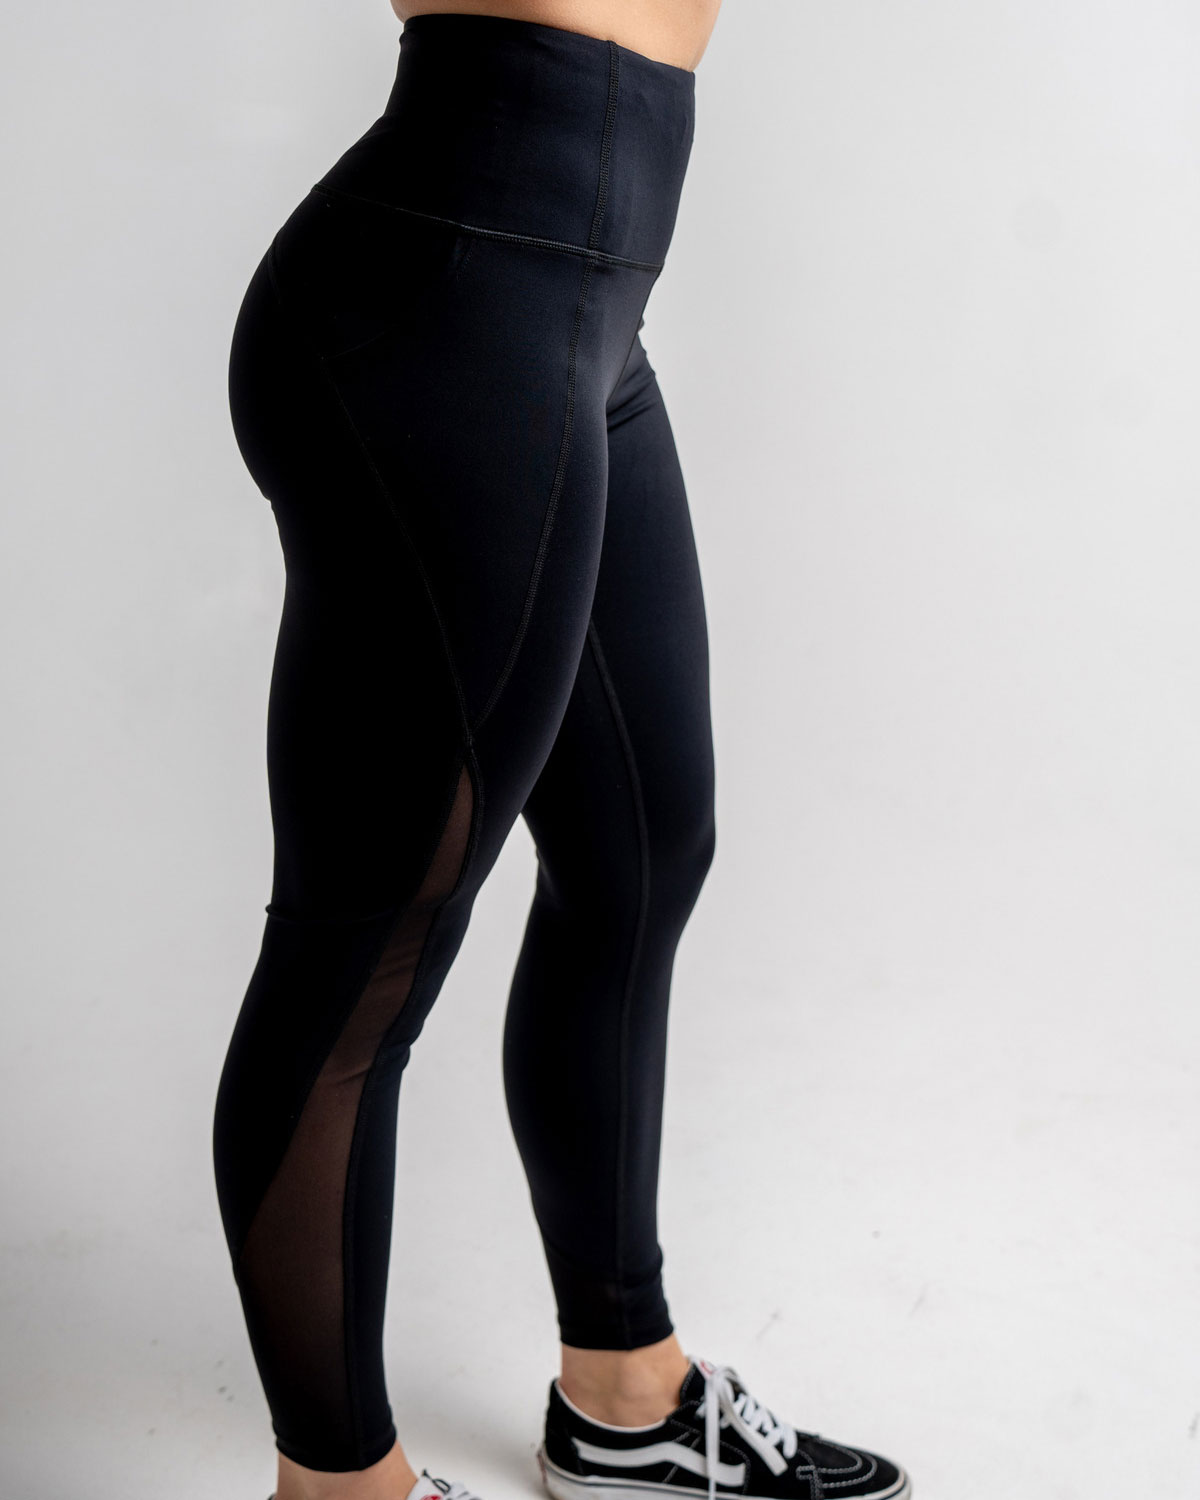 Made to Move Leggings Black